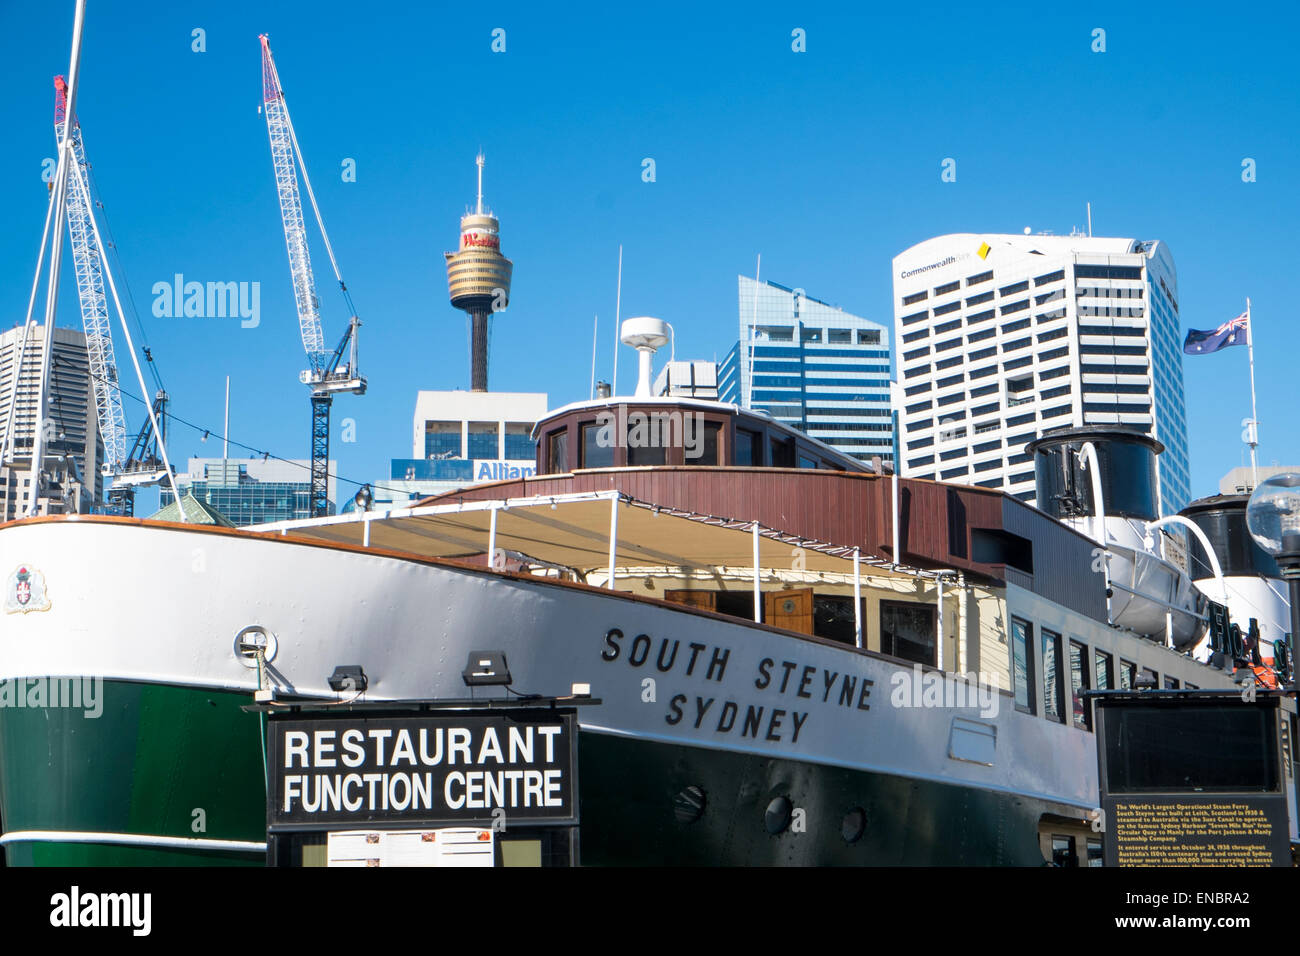 south steyne, formerly a manly ferry boat, now a restaurant in Darling harbour,sydney,australia Stock Photo